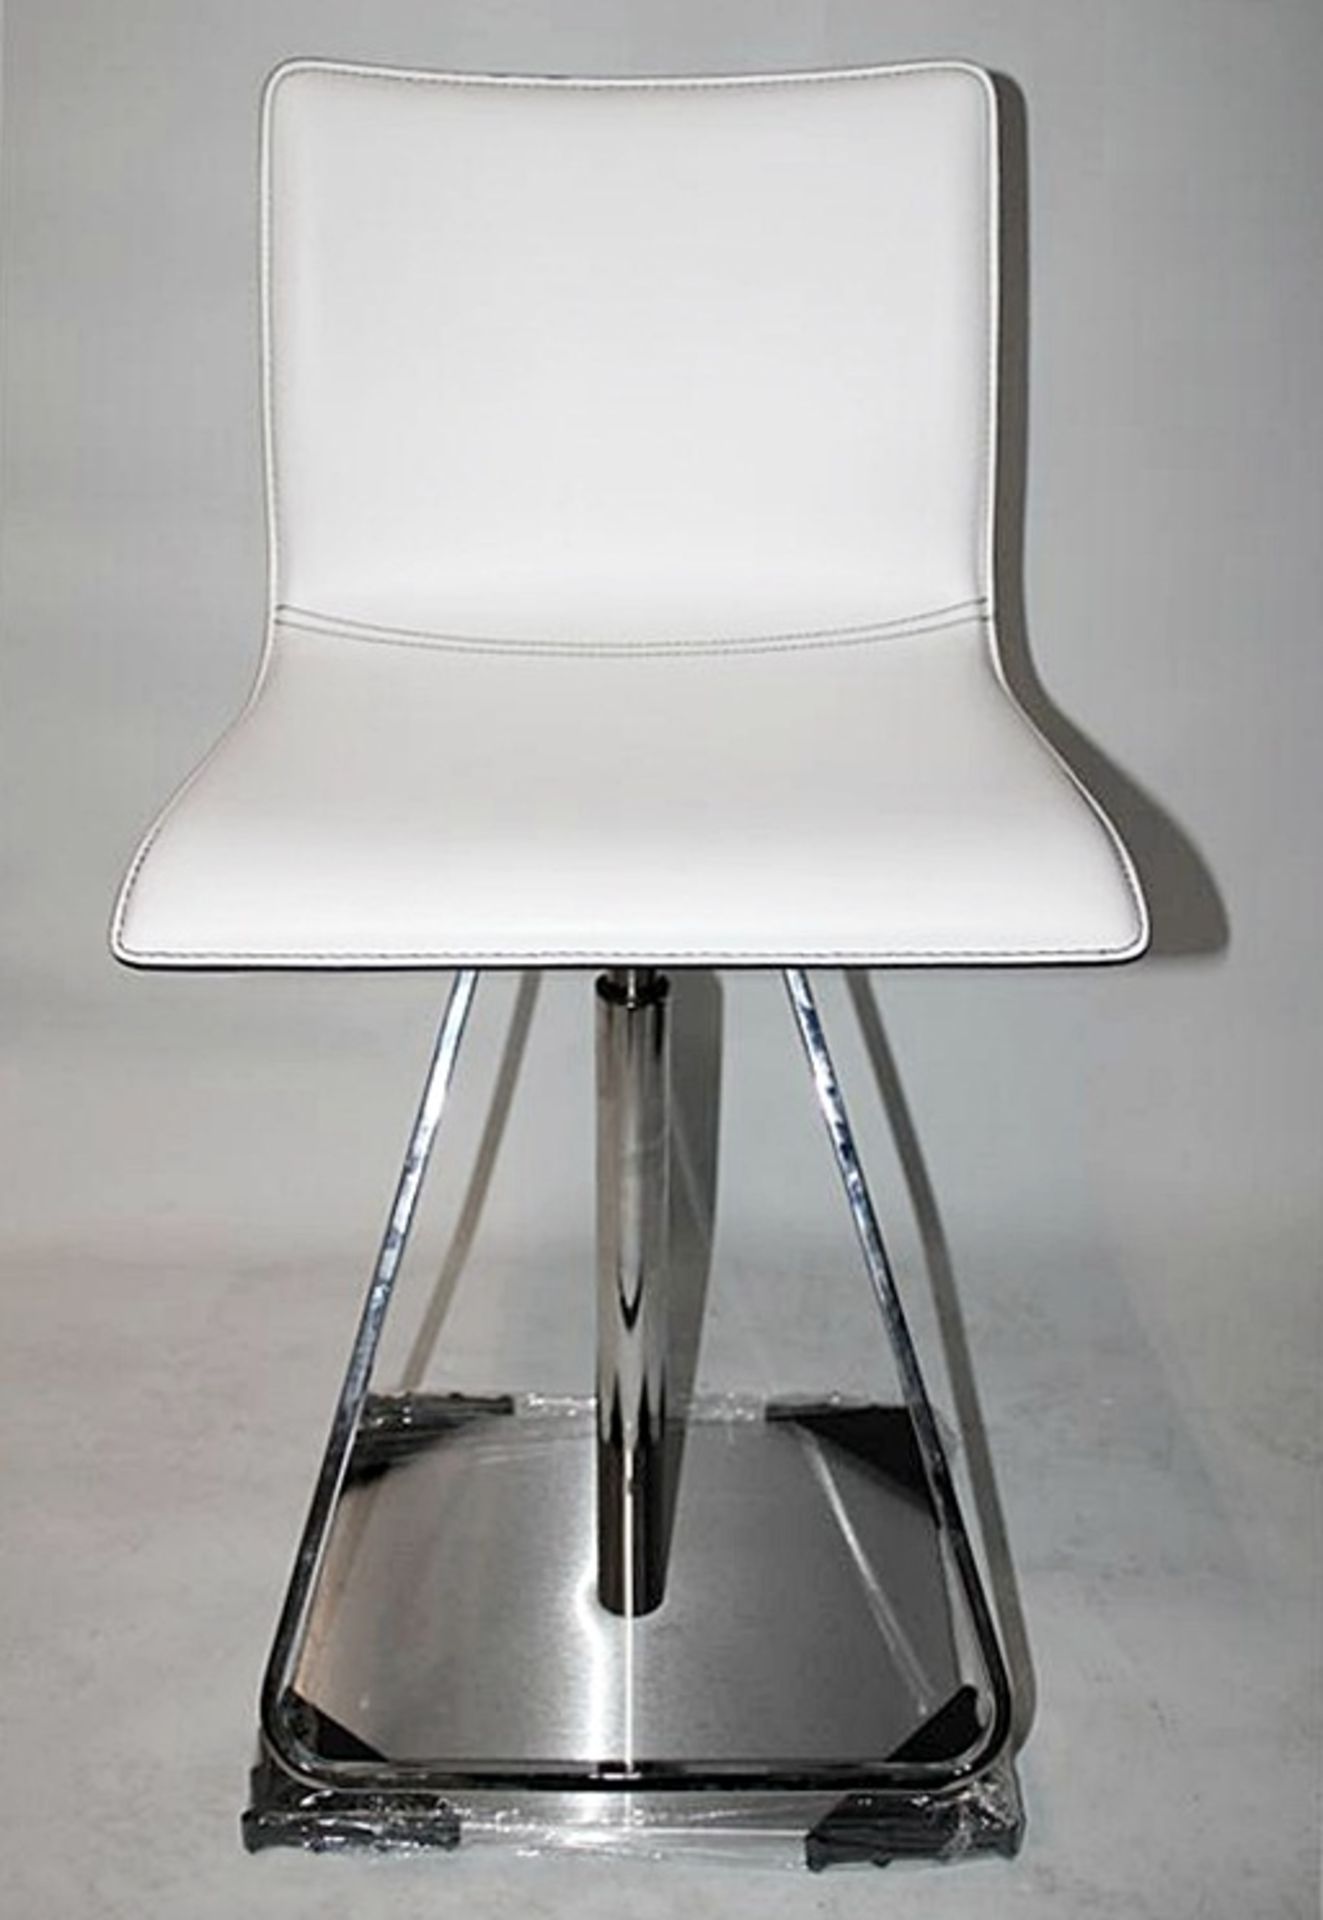 1 x CATTELAN "Toto" Stool - White With Black Stitching  - Made In Italy - Ref: 3352787 - CL087 - - Image 2 of 9